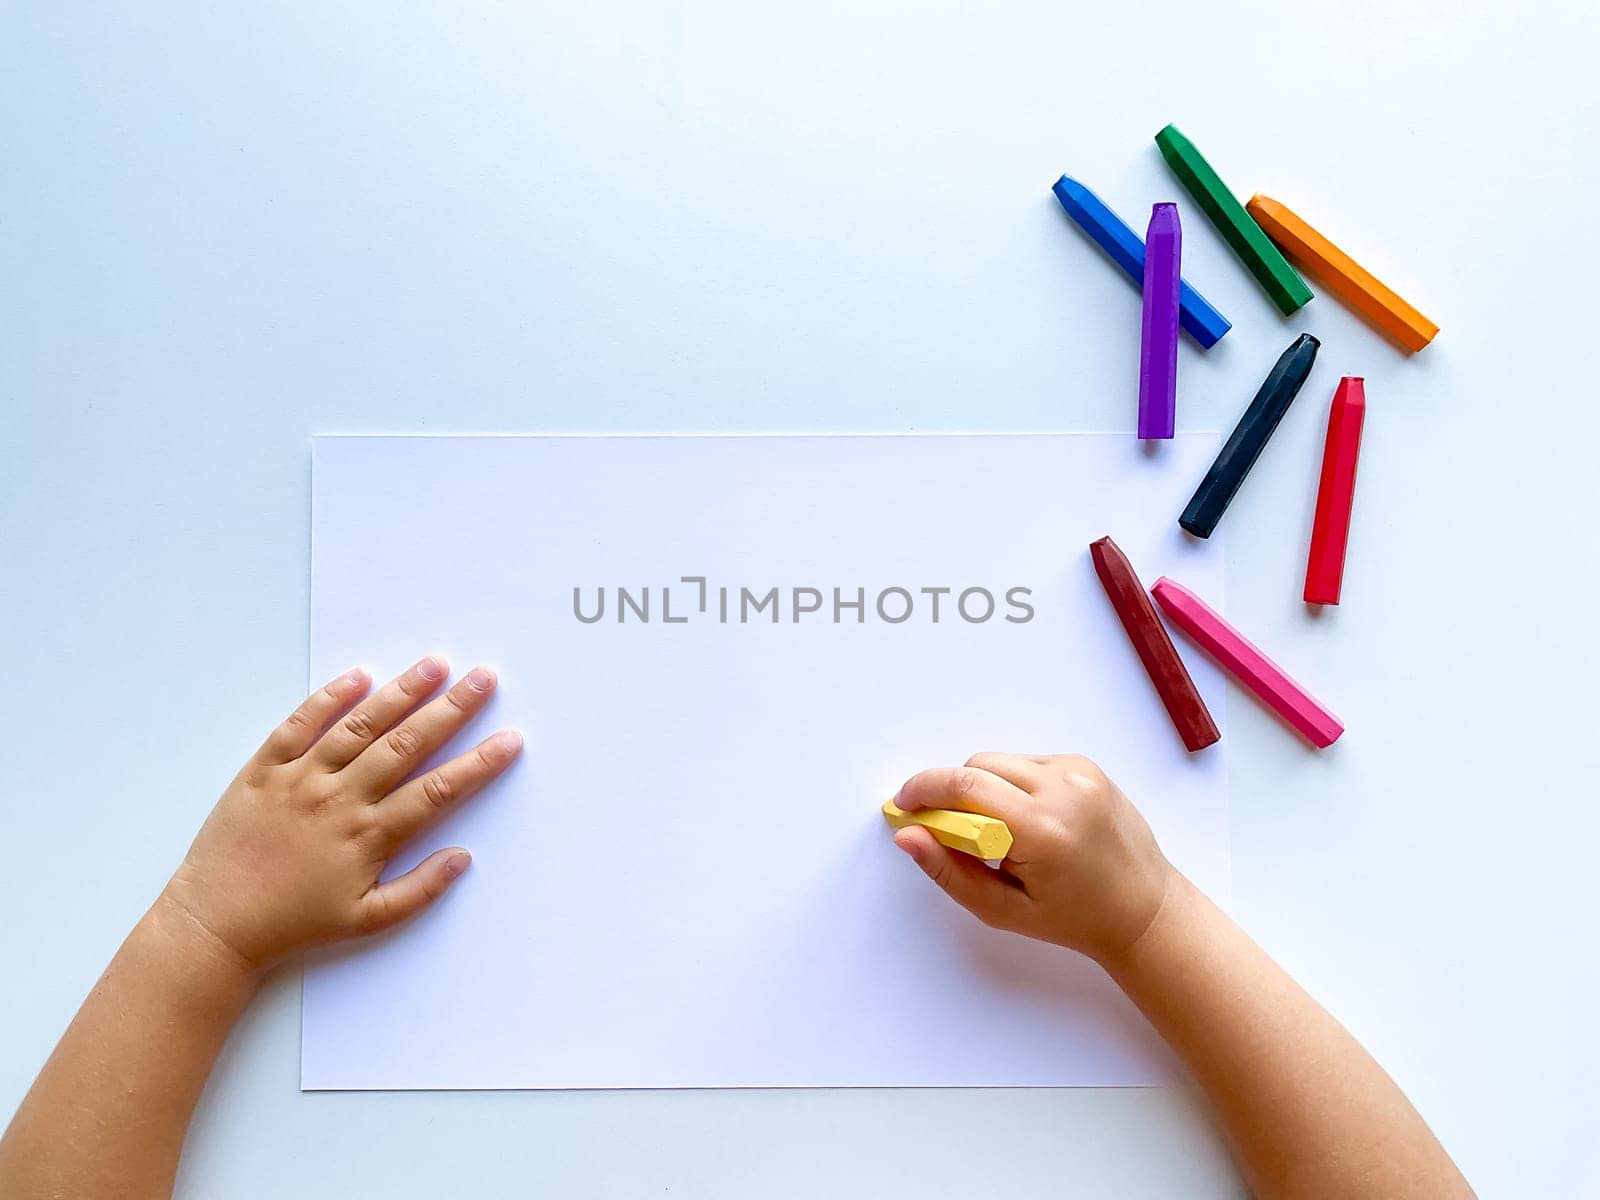 Childrens hands draw with colored wax crayons on a white sheet of paper. Top view of a blank sheet. High quality